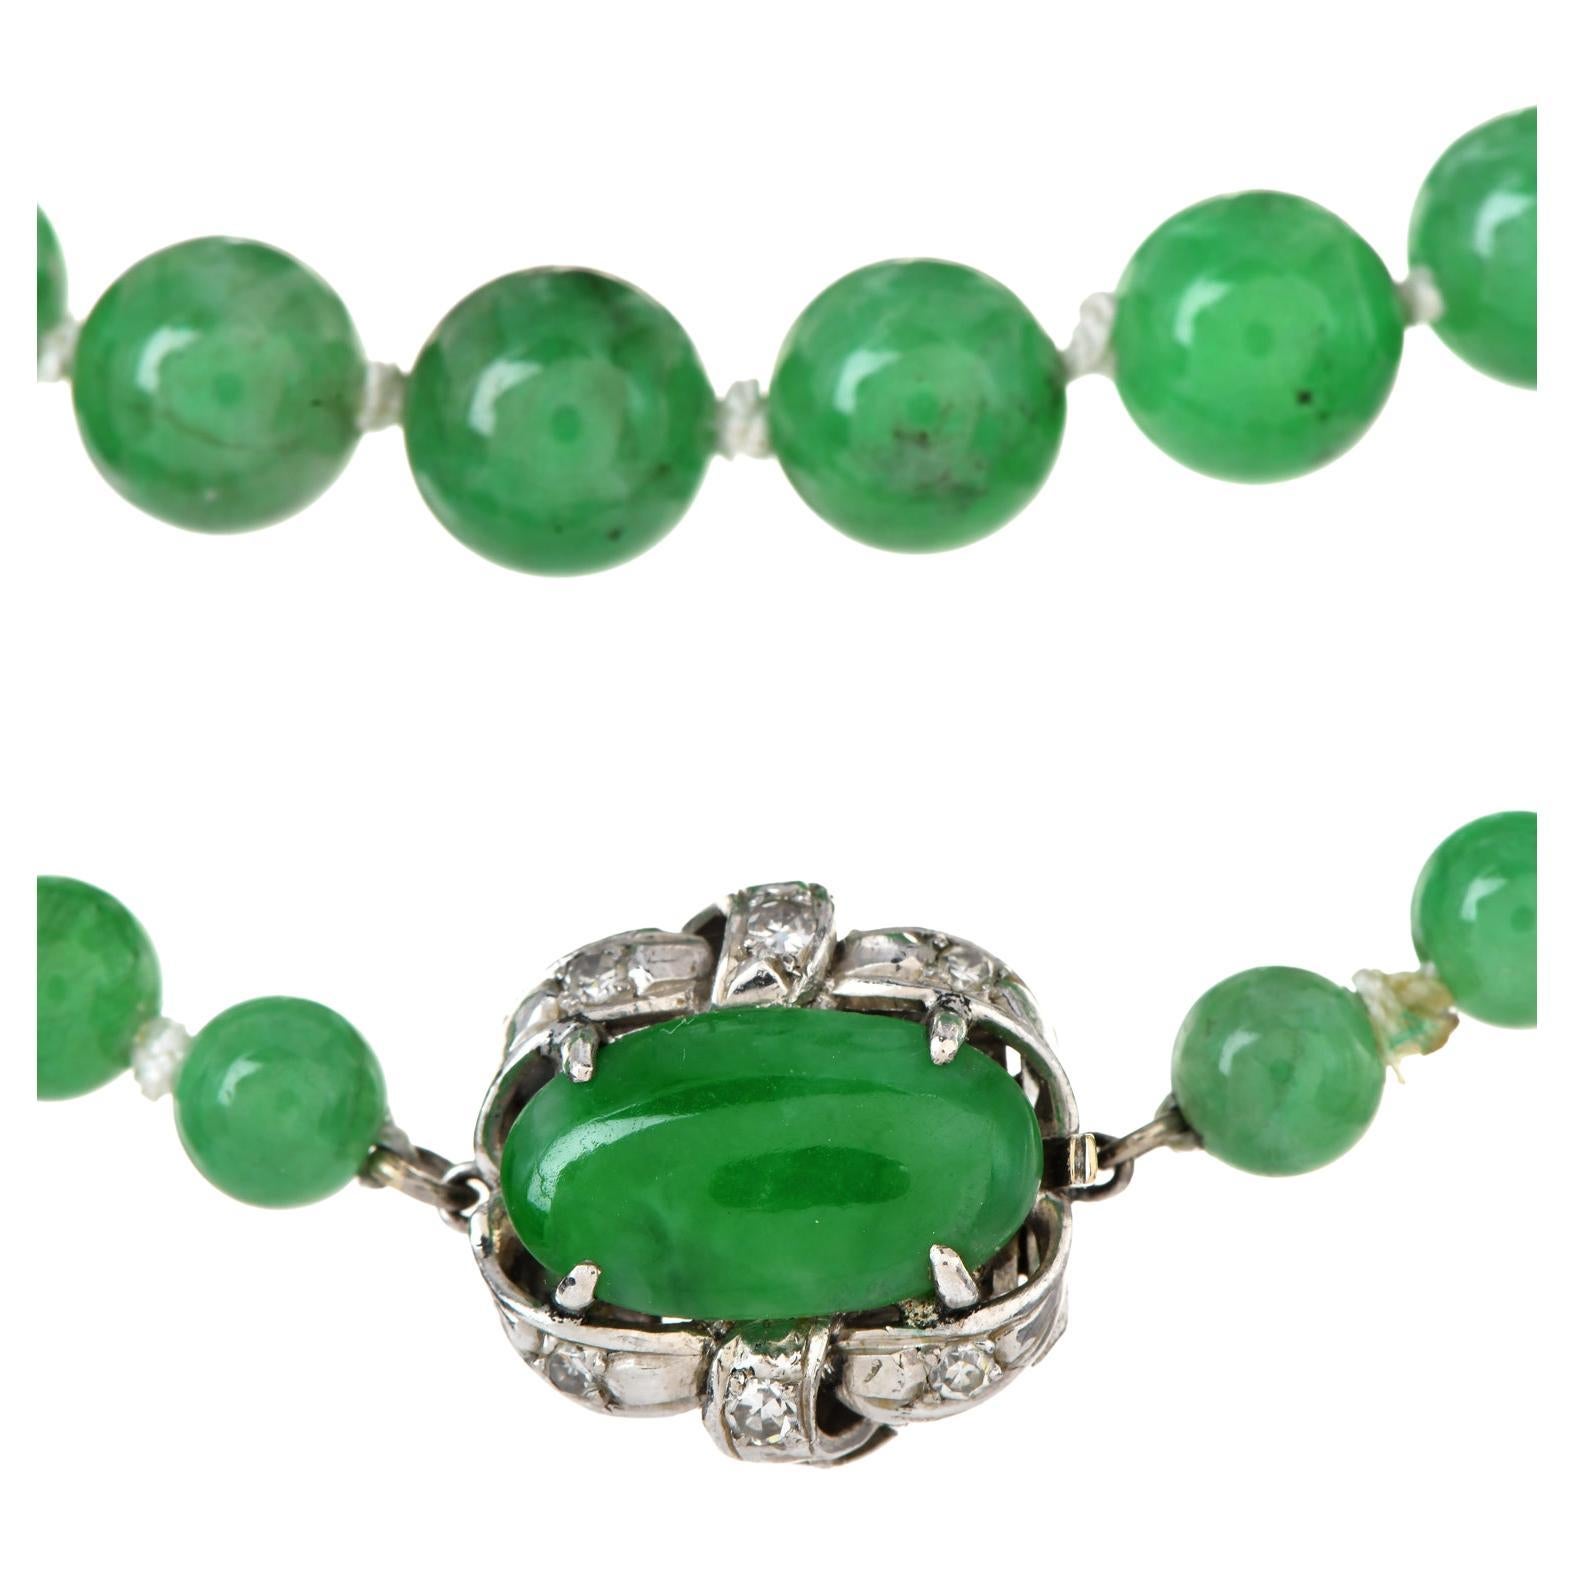 A strand of Natural No Treatments  Genuine Green Jade Beads adds a touch of life to any outfit.

This piece is versatile in how the wearer prefers; it can be worn in a single or double style.

80 Finely & evenly vivid green matched 5 mm to 8 mm